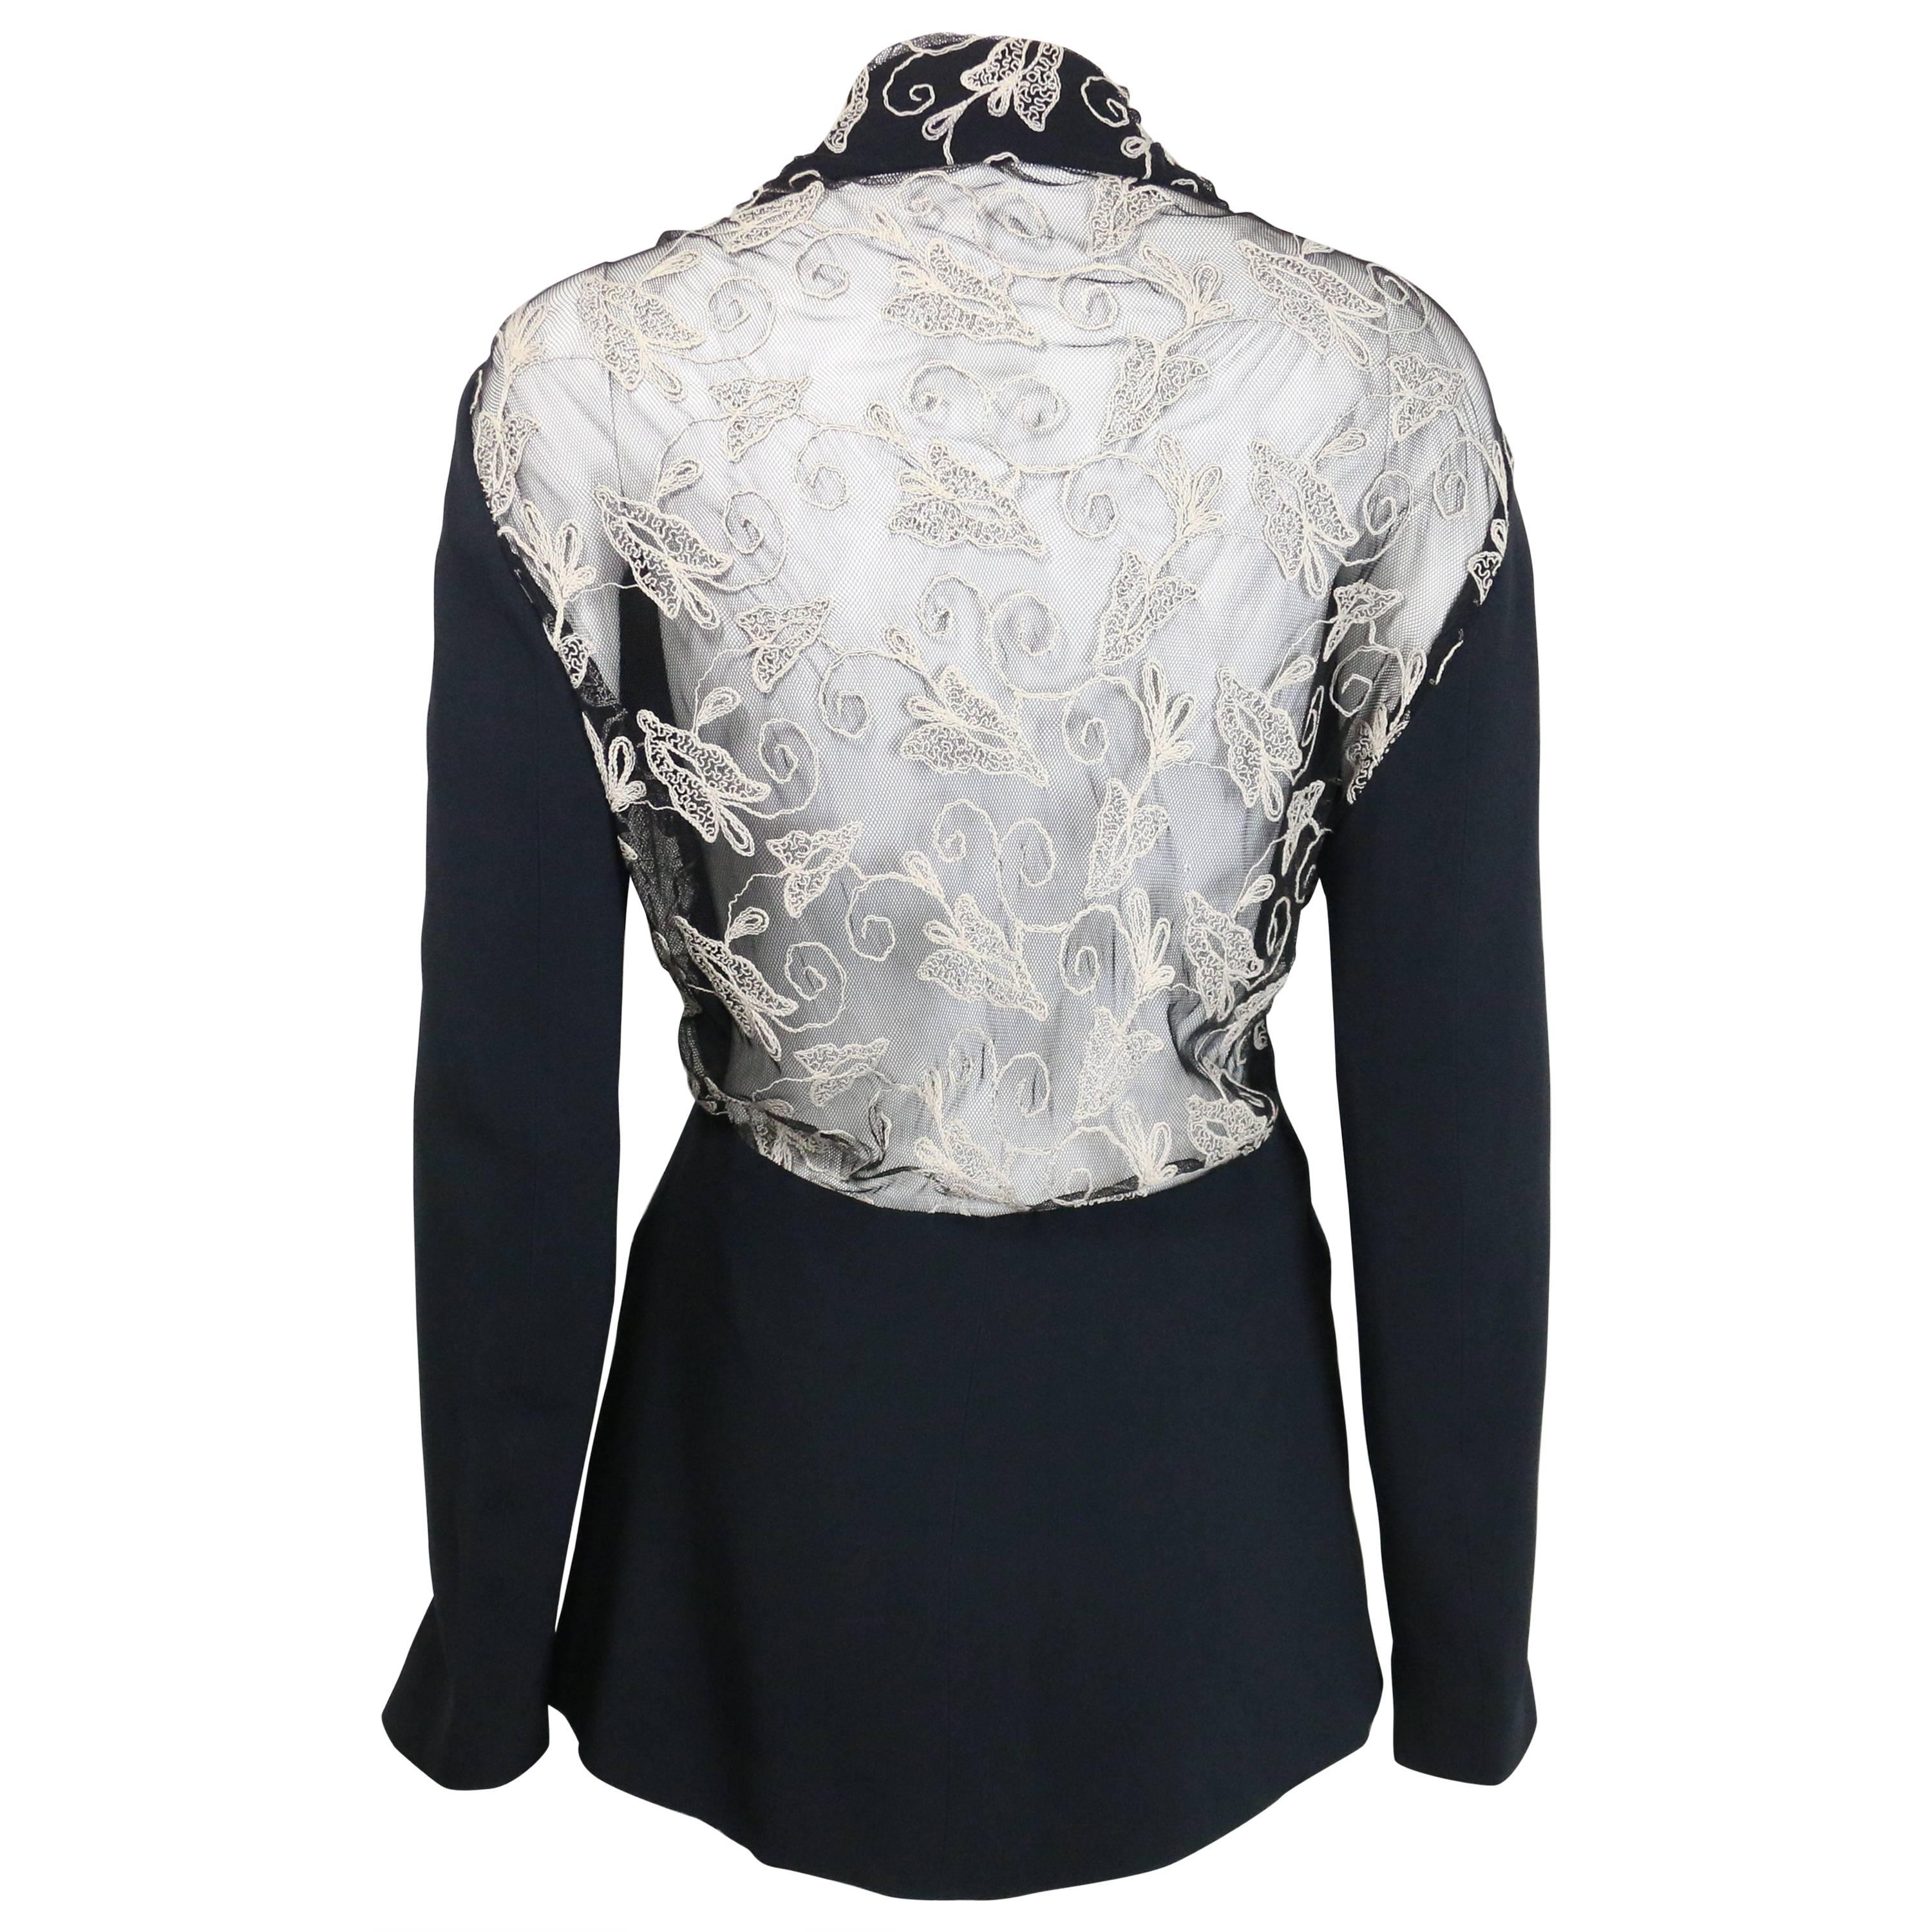 Vintage 90s Batik Black Jacket with White Embroidered Lace Behind  For Sale